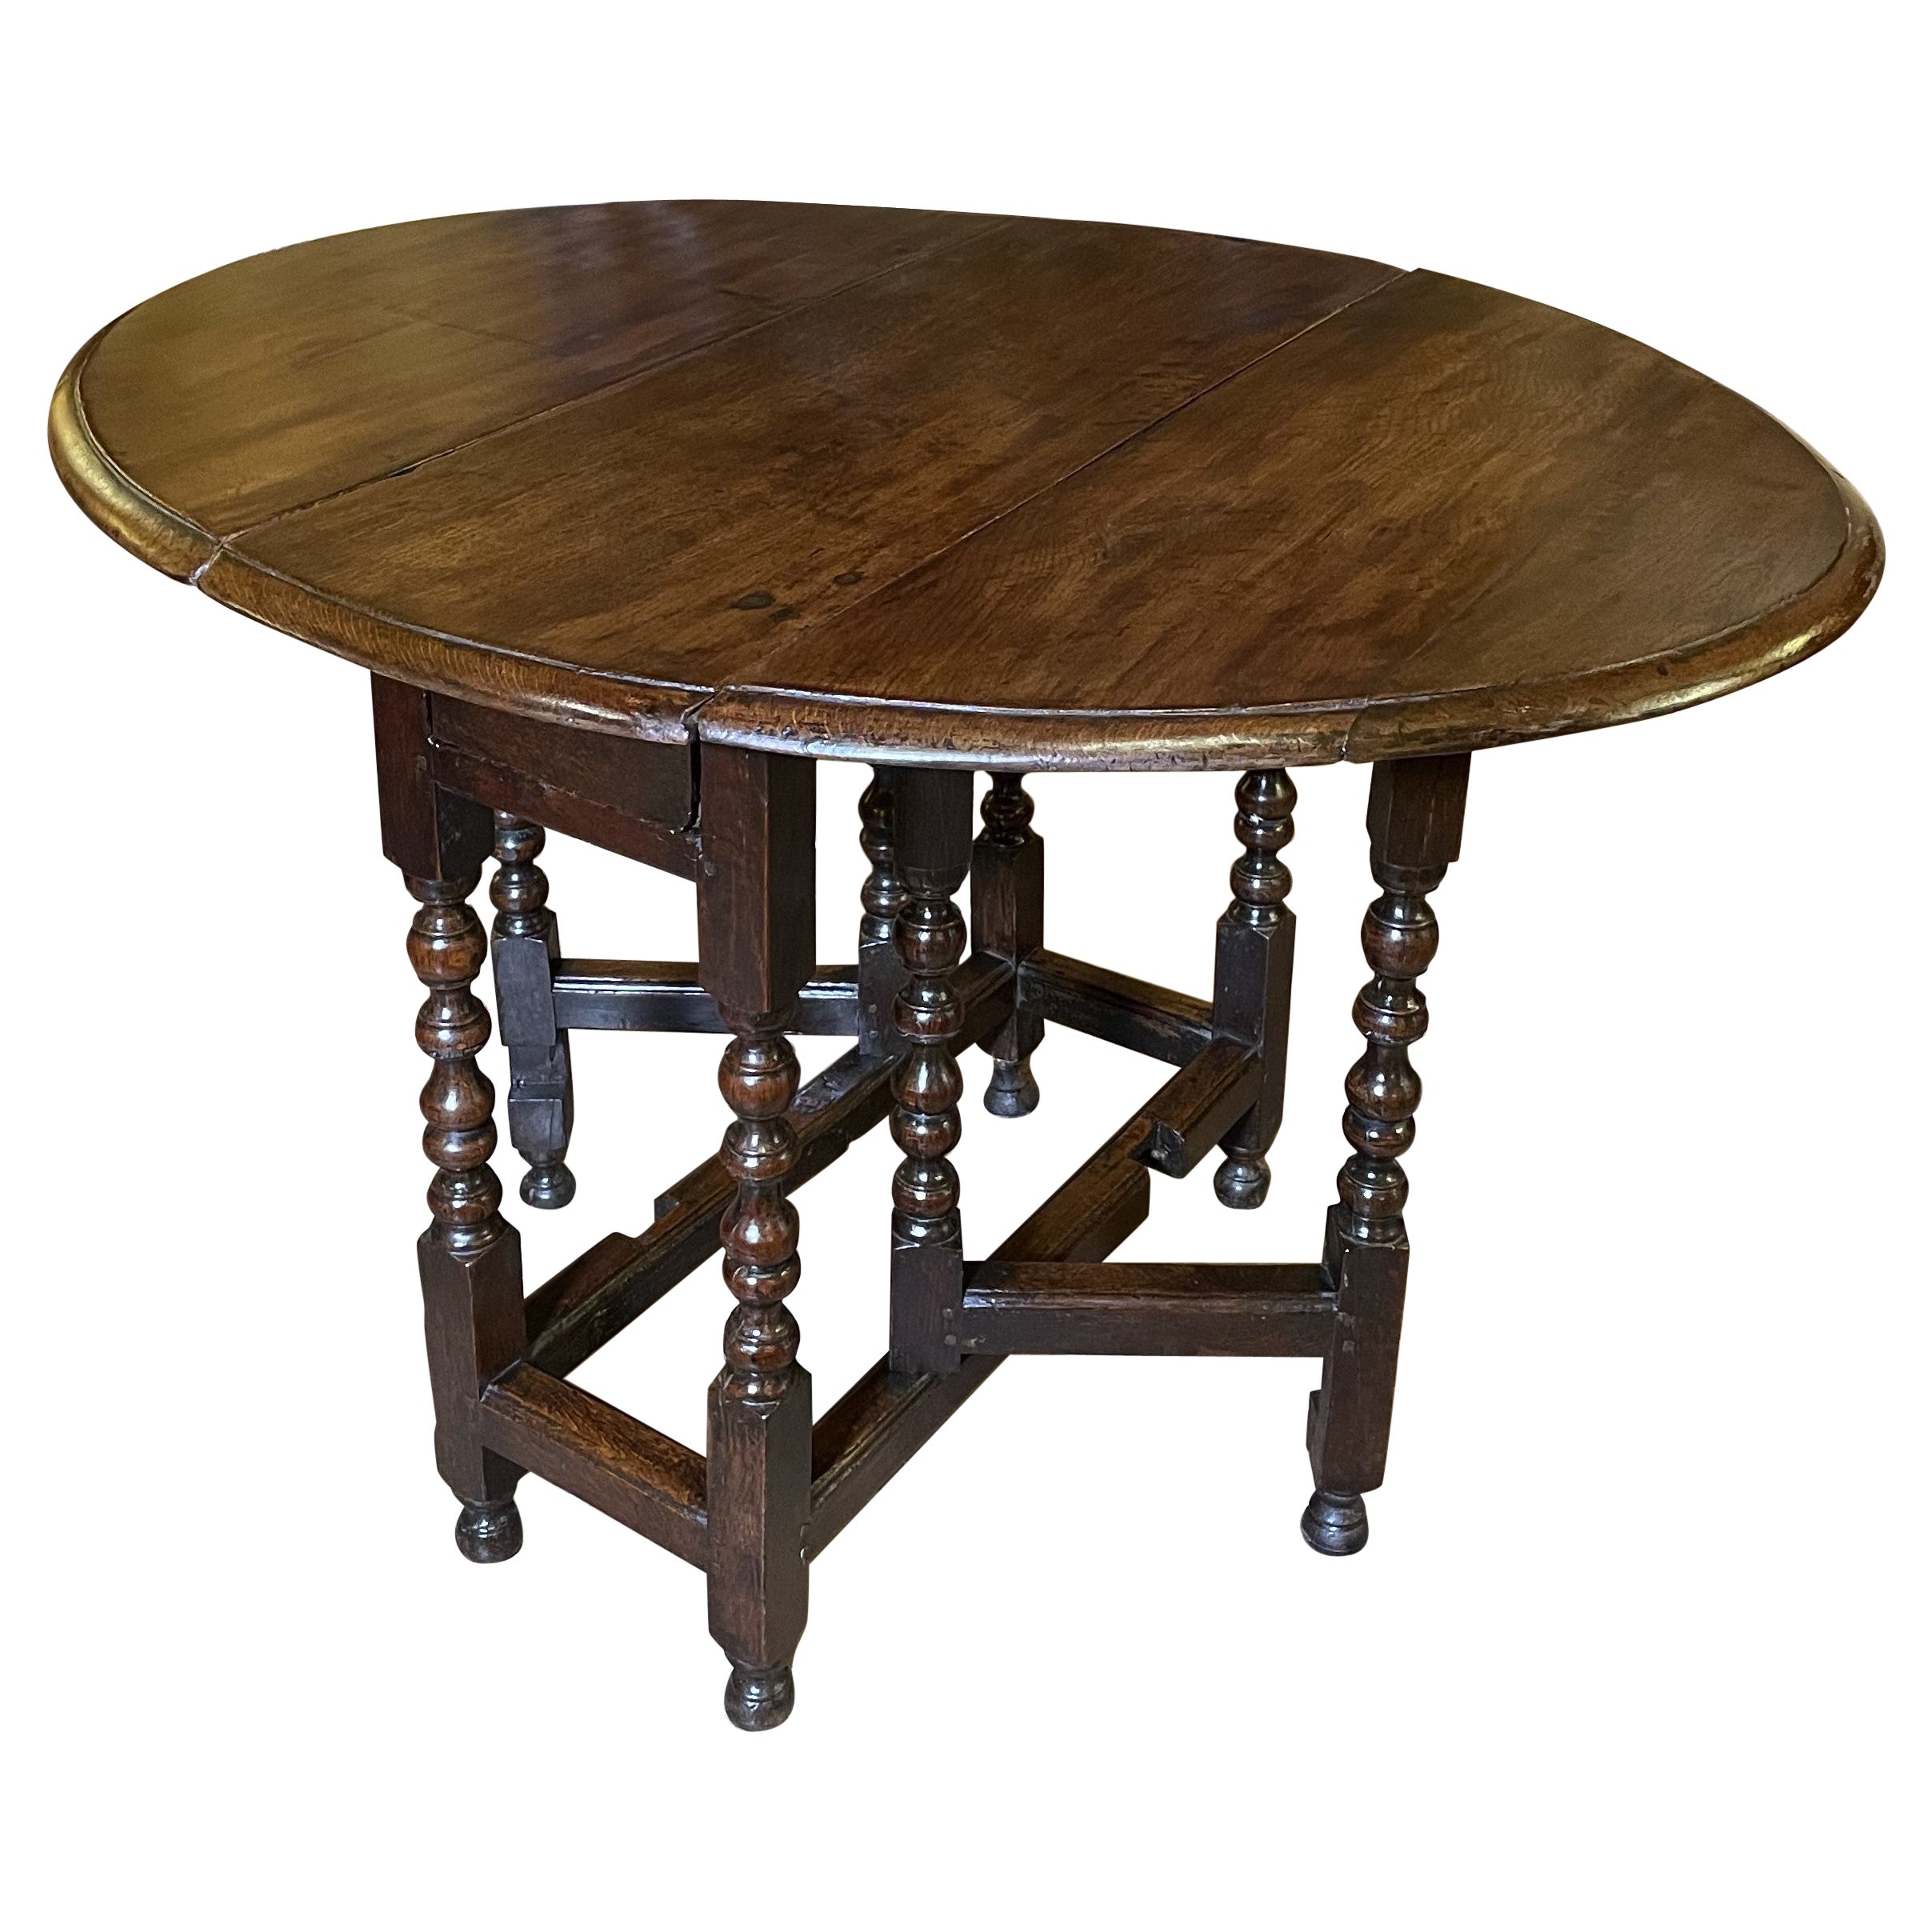 Oak Gateleg Table From The 17th Century For Sale